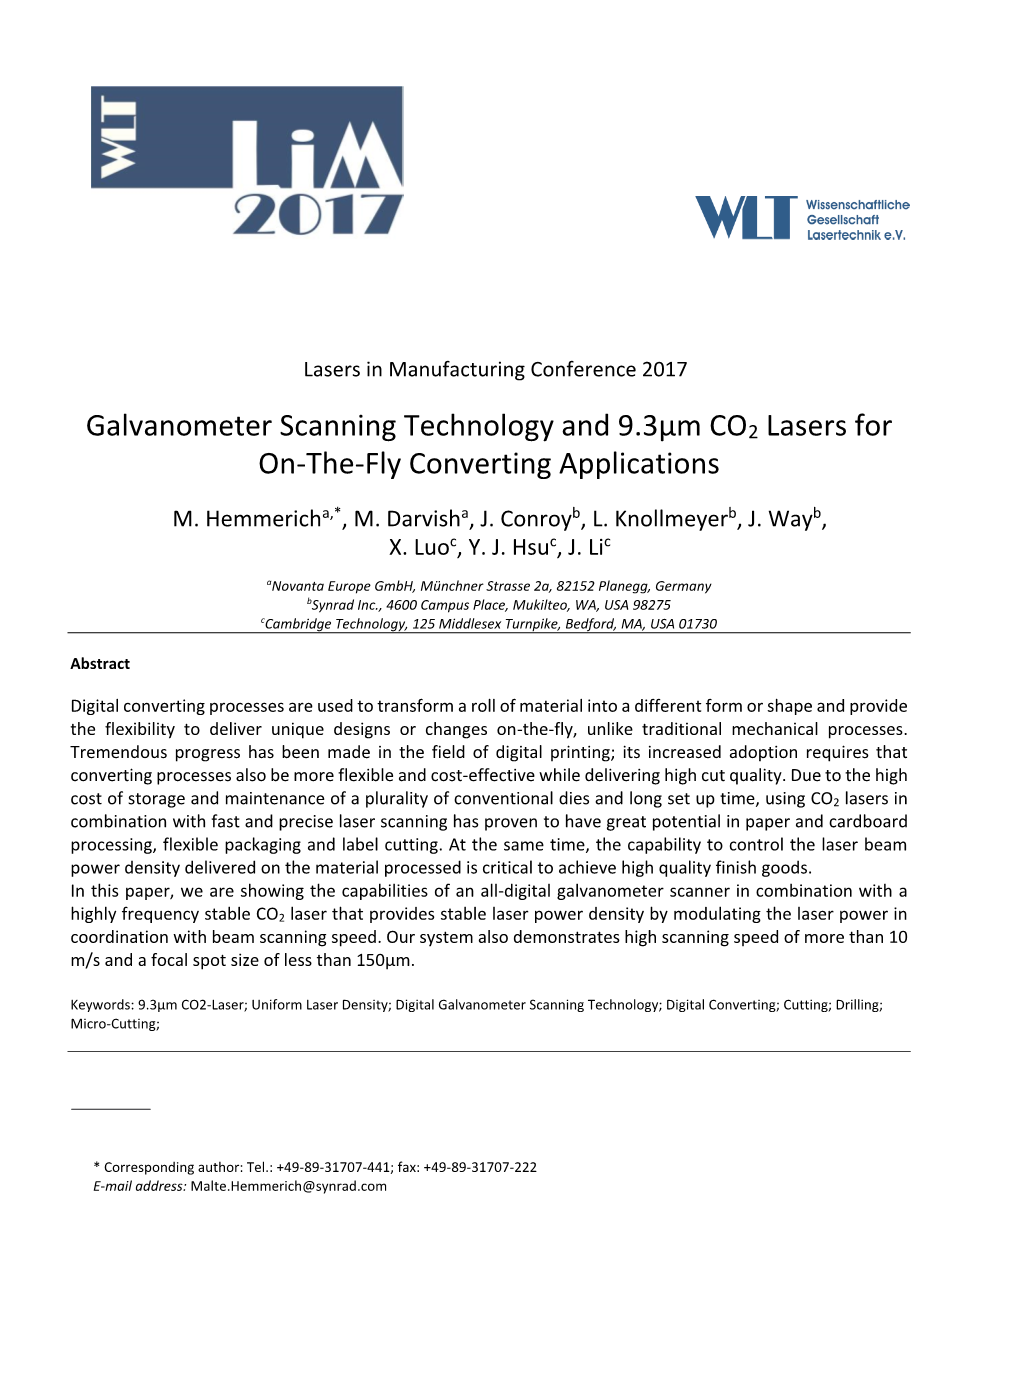 Galvanometer Scanning Technology and 9.3Μm CO2 Lasers for On-The-Fly Converting Applications